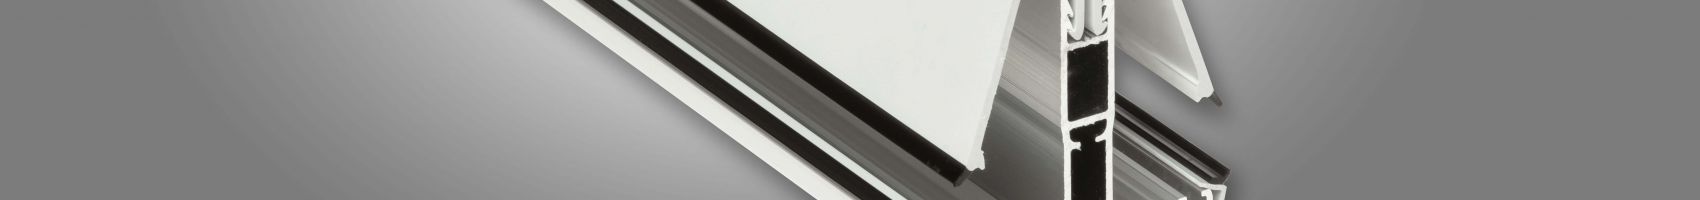 6m White Eaves Beam To Suit Self Support Glazing Bars 